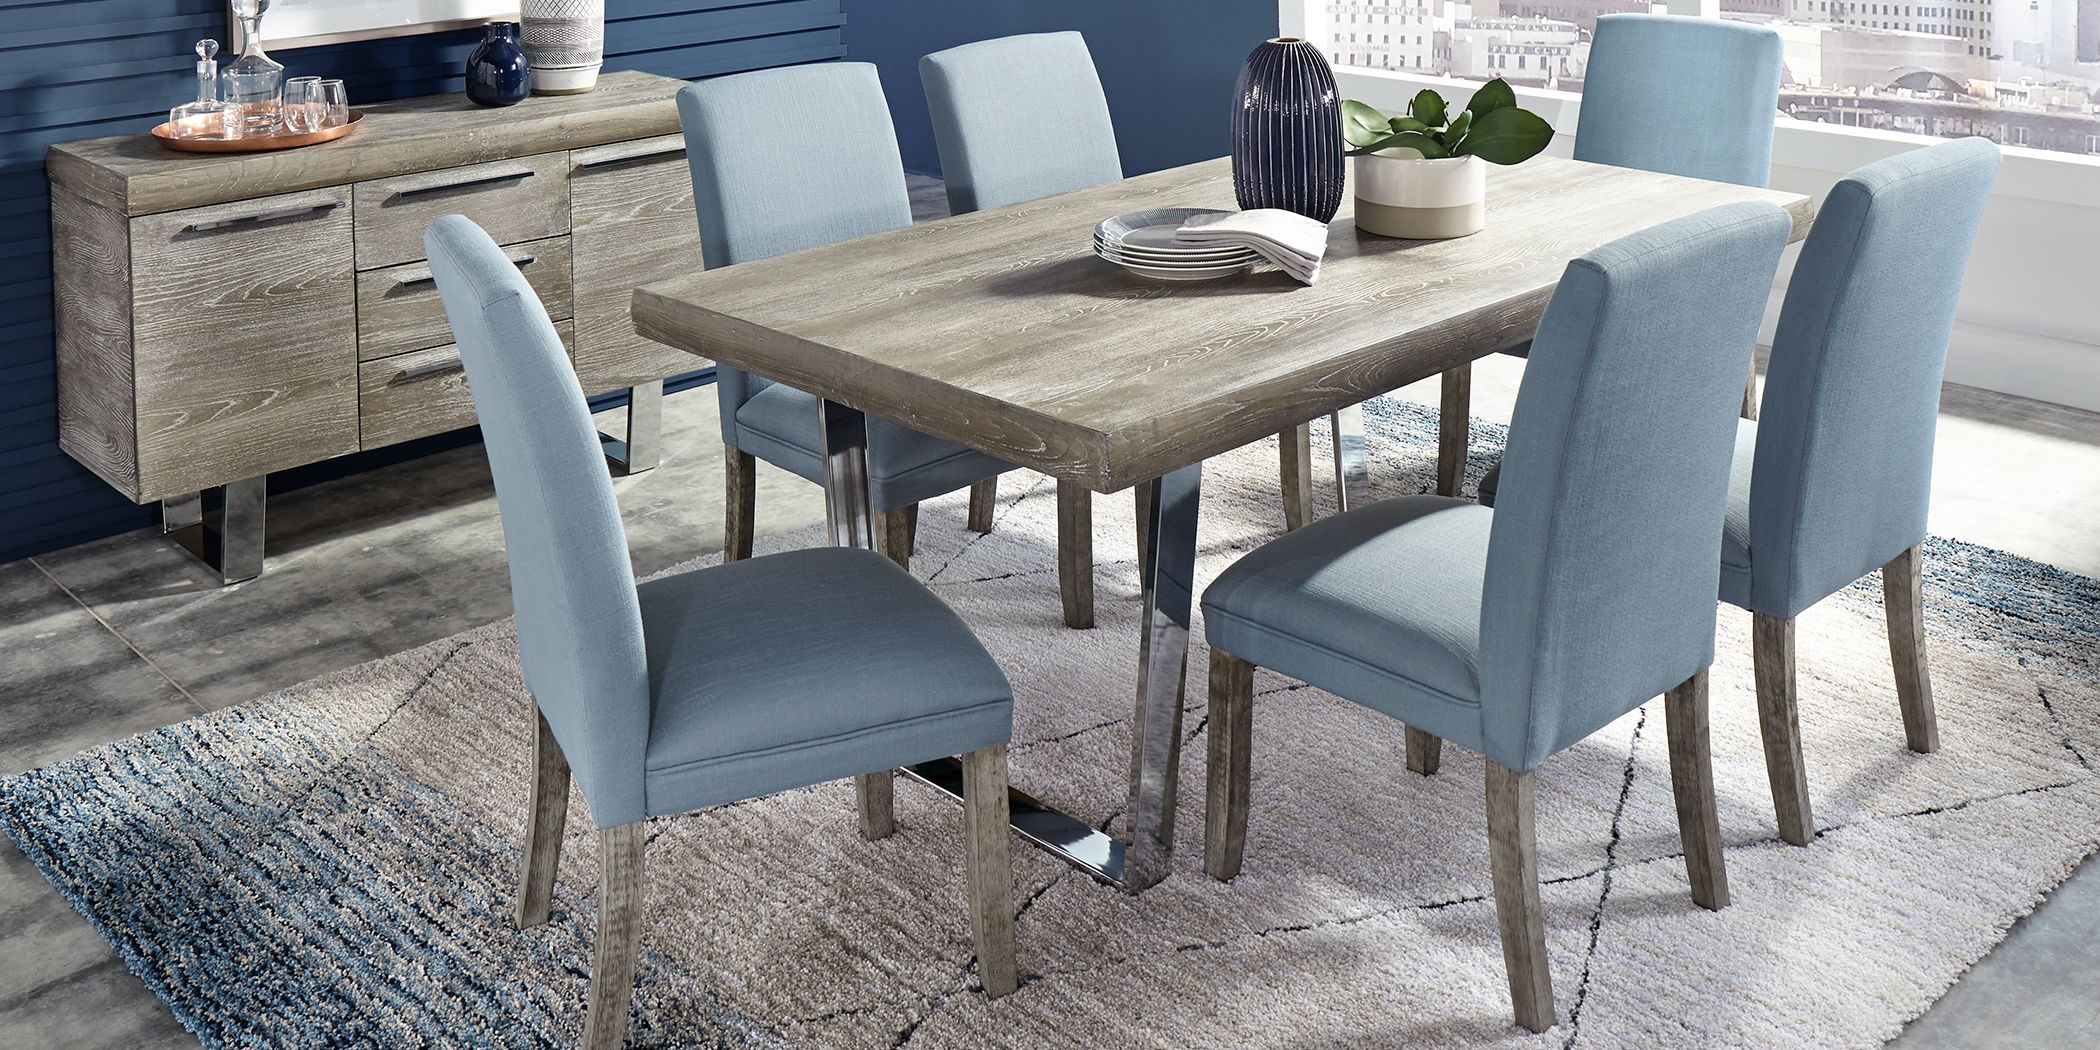 Blue Dining Room Table Sets For, Blue Dining Room Set With Bench